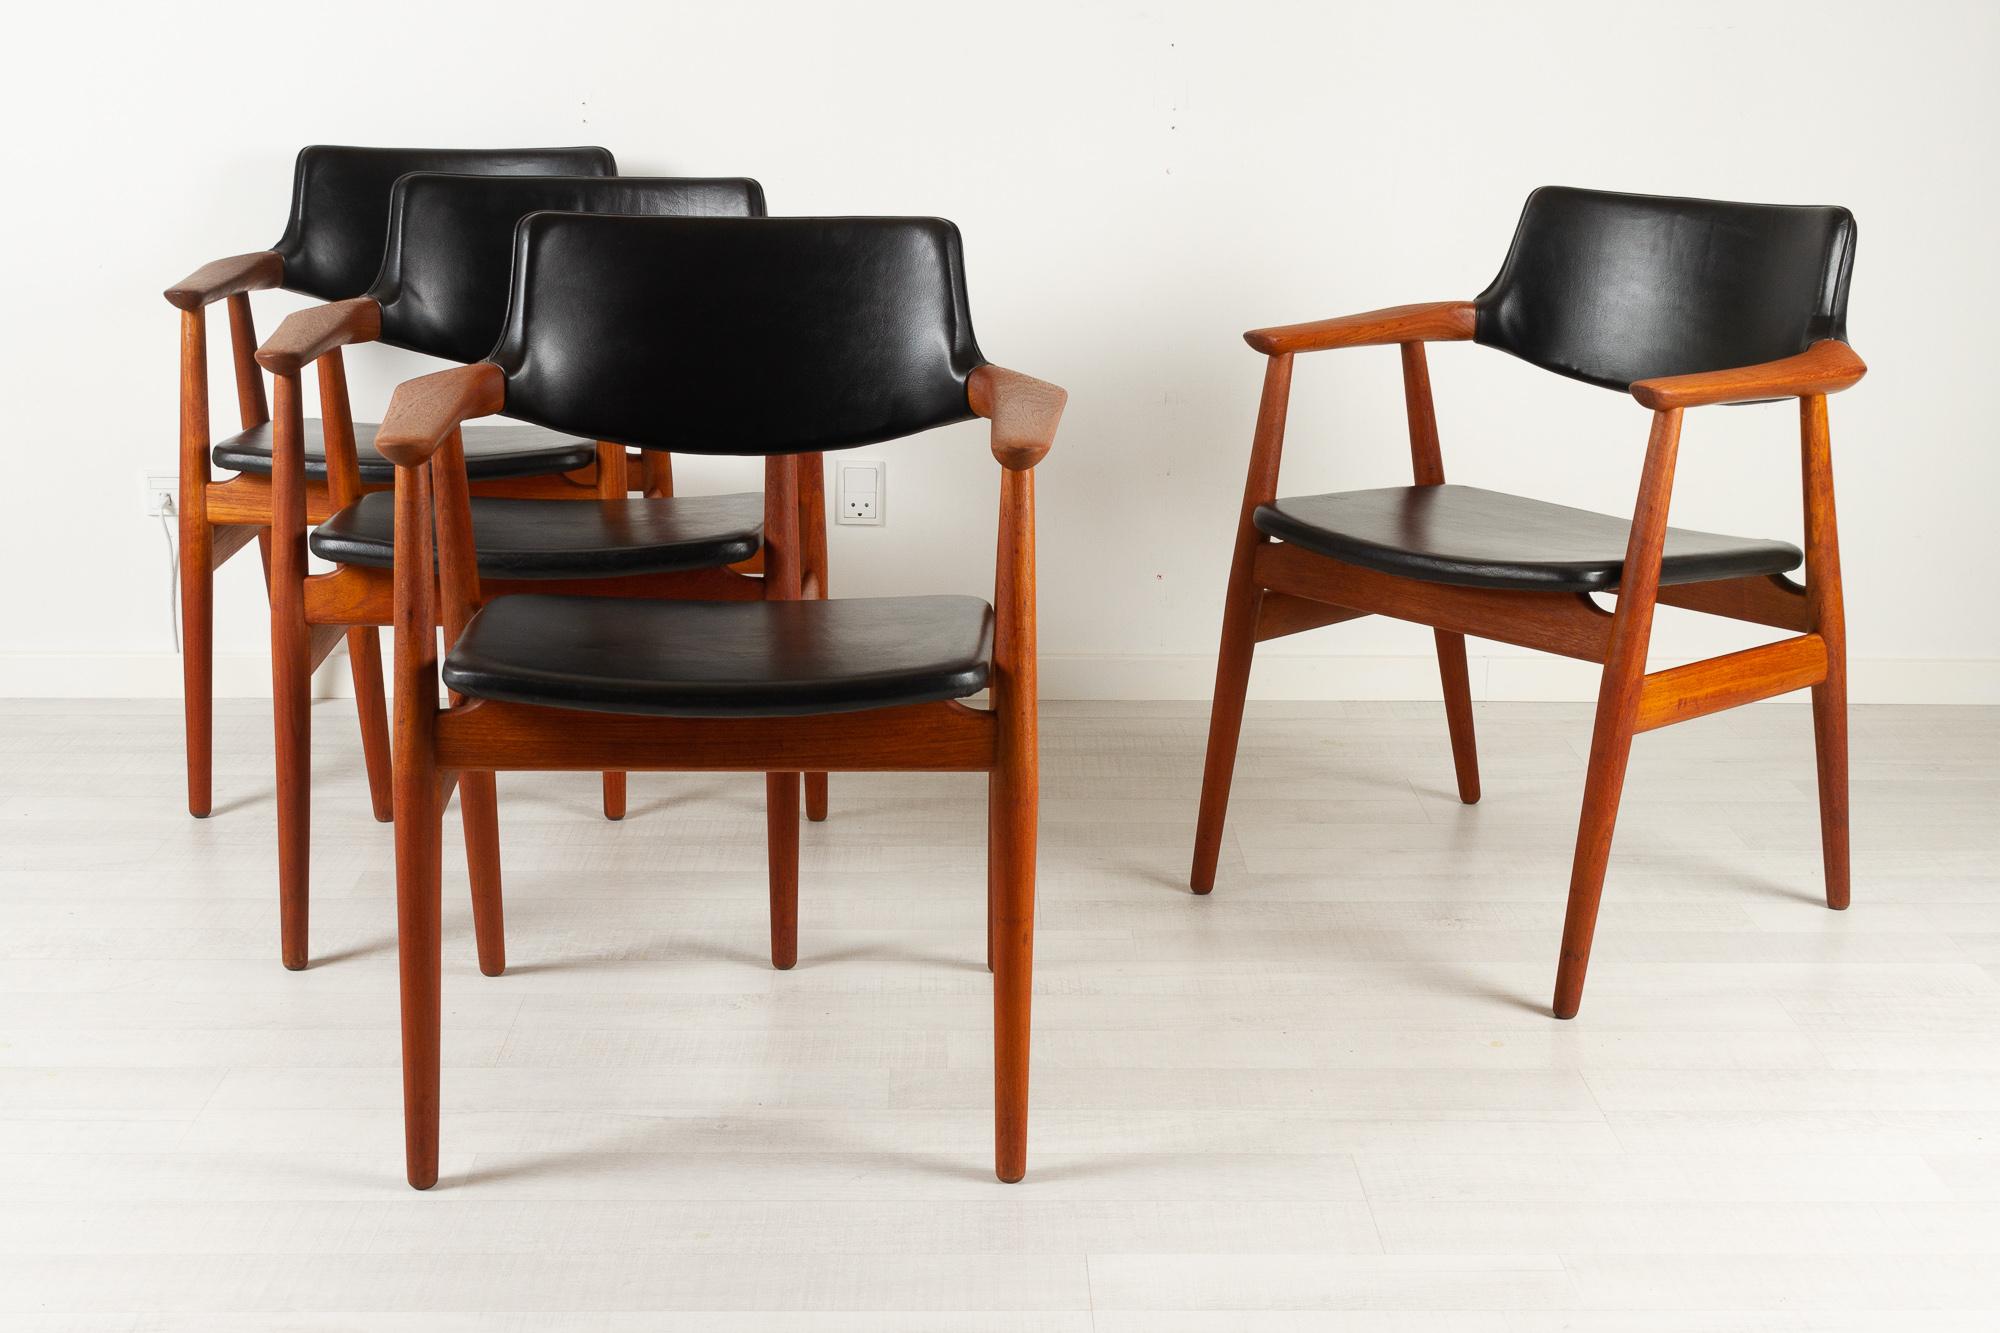 Vintage Danish teak armchairs by Svend Aage Eriksen for Glostrup Møbelfabrik 1960s set of 4.
Beautiful Danish Mid-Century Modern design. Model GM 11 in solid teak and original black leather upholstery. Round tapered legs and sculpted armrests. Wide